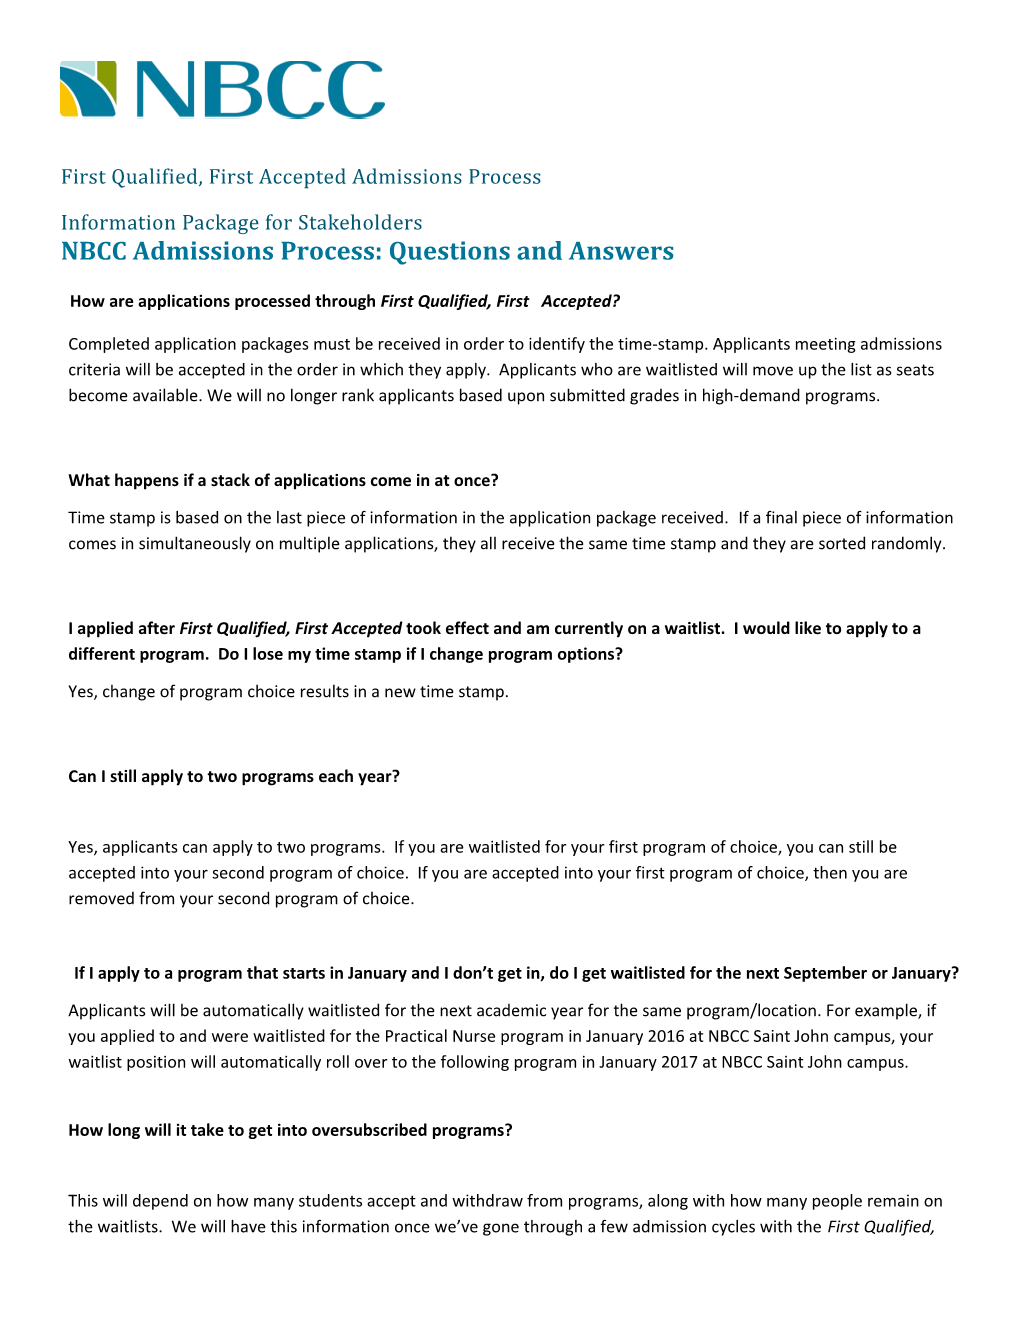 NBCC Admissions Process: Questions and Answers